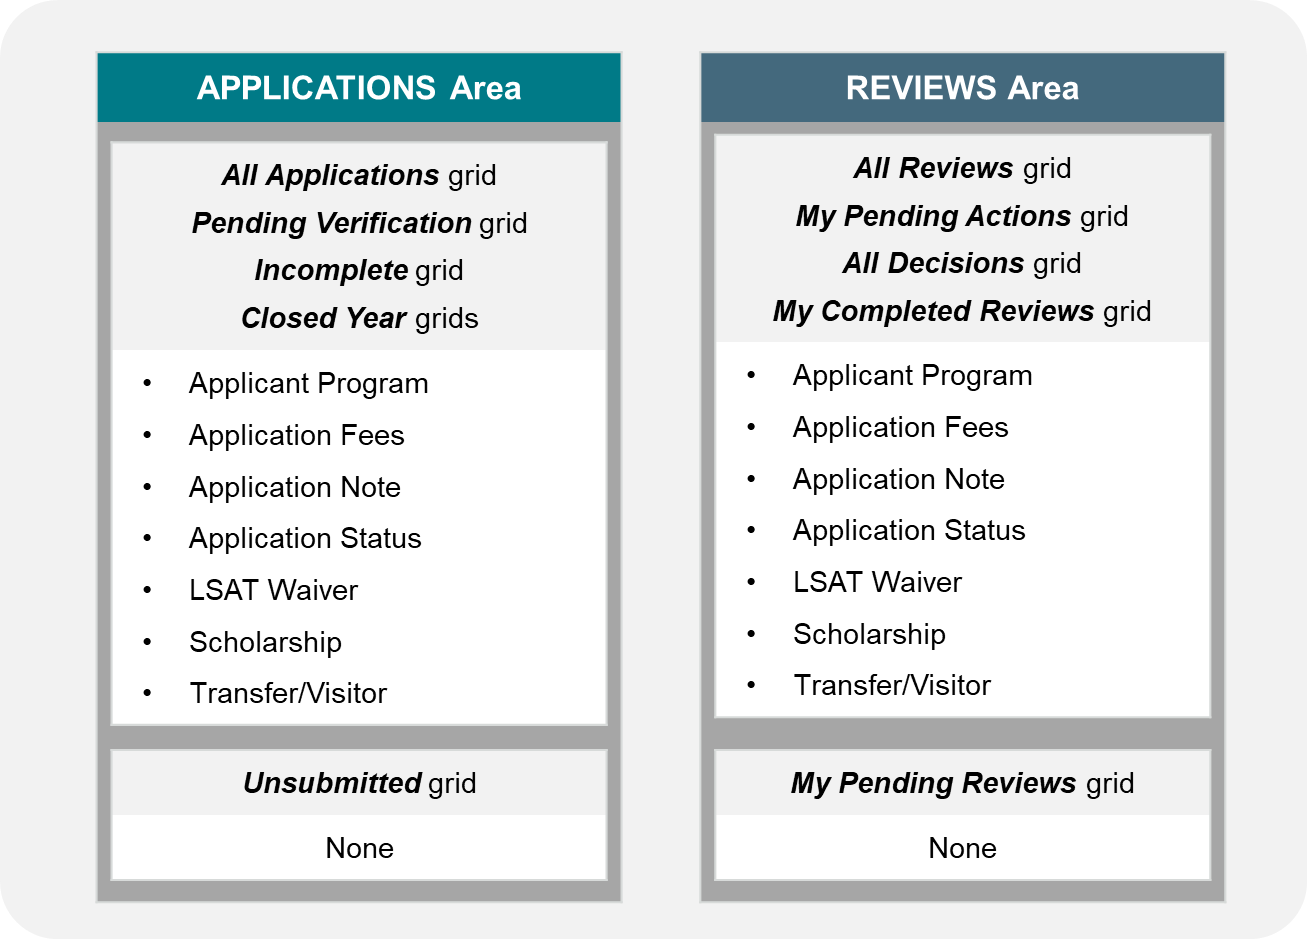 Image shows field values within the Applications and Reviews areas that you can add or update which are, Applicant Program, Application Fees, Application Note, Application Status, LSAT Waiver, Scholarship, Transfer/Visitor.